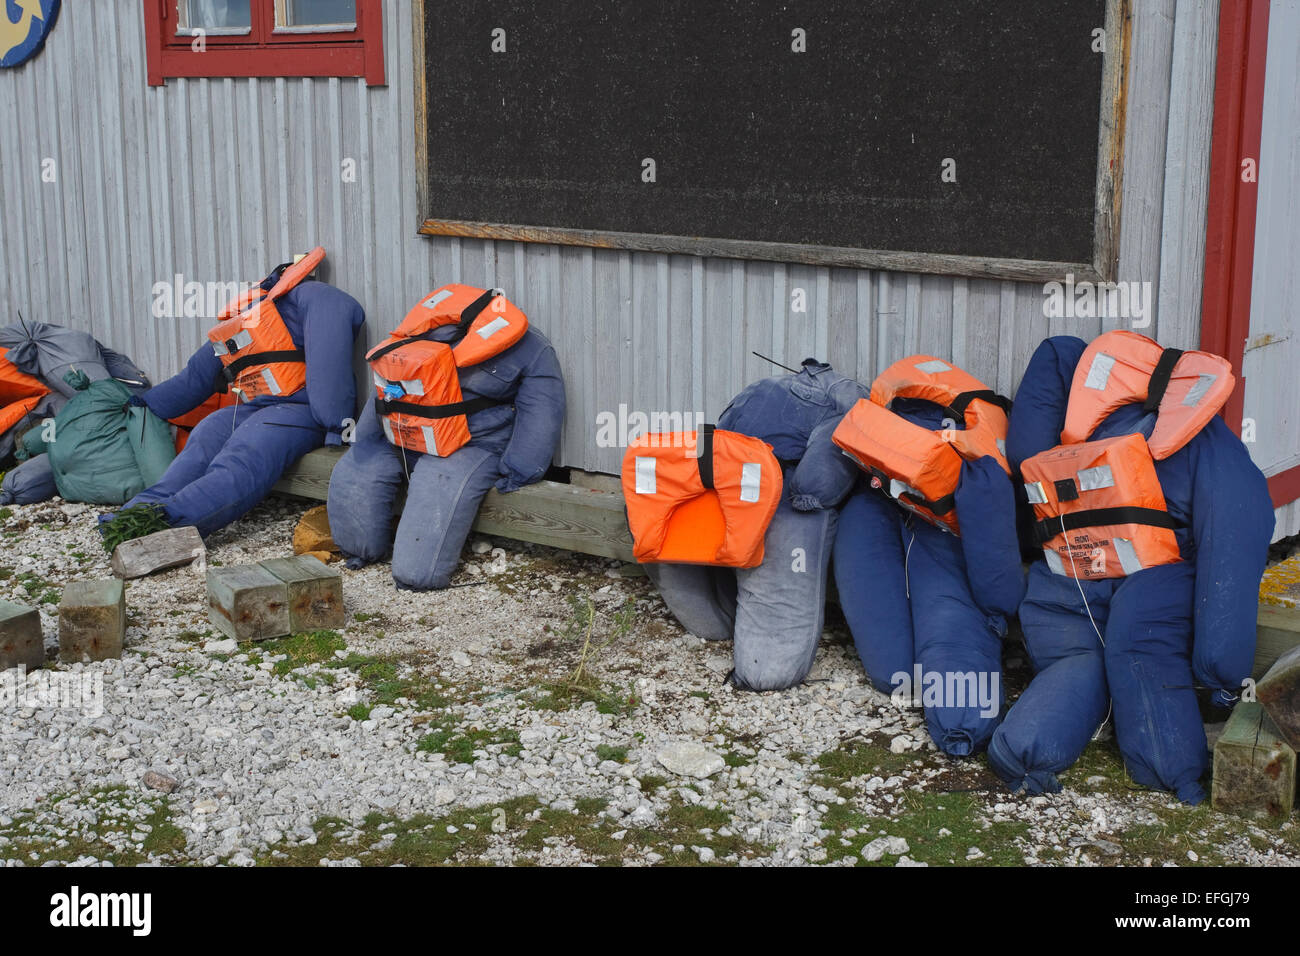 Dolls with life jackets to hold rescue exercise. Lauterhorn, Fårö Stock Photo